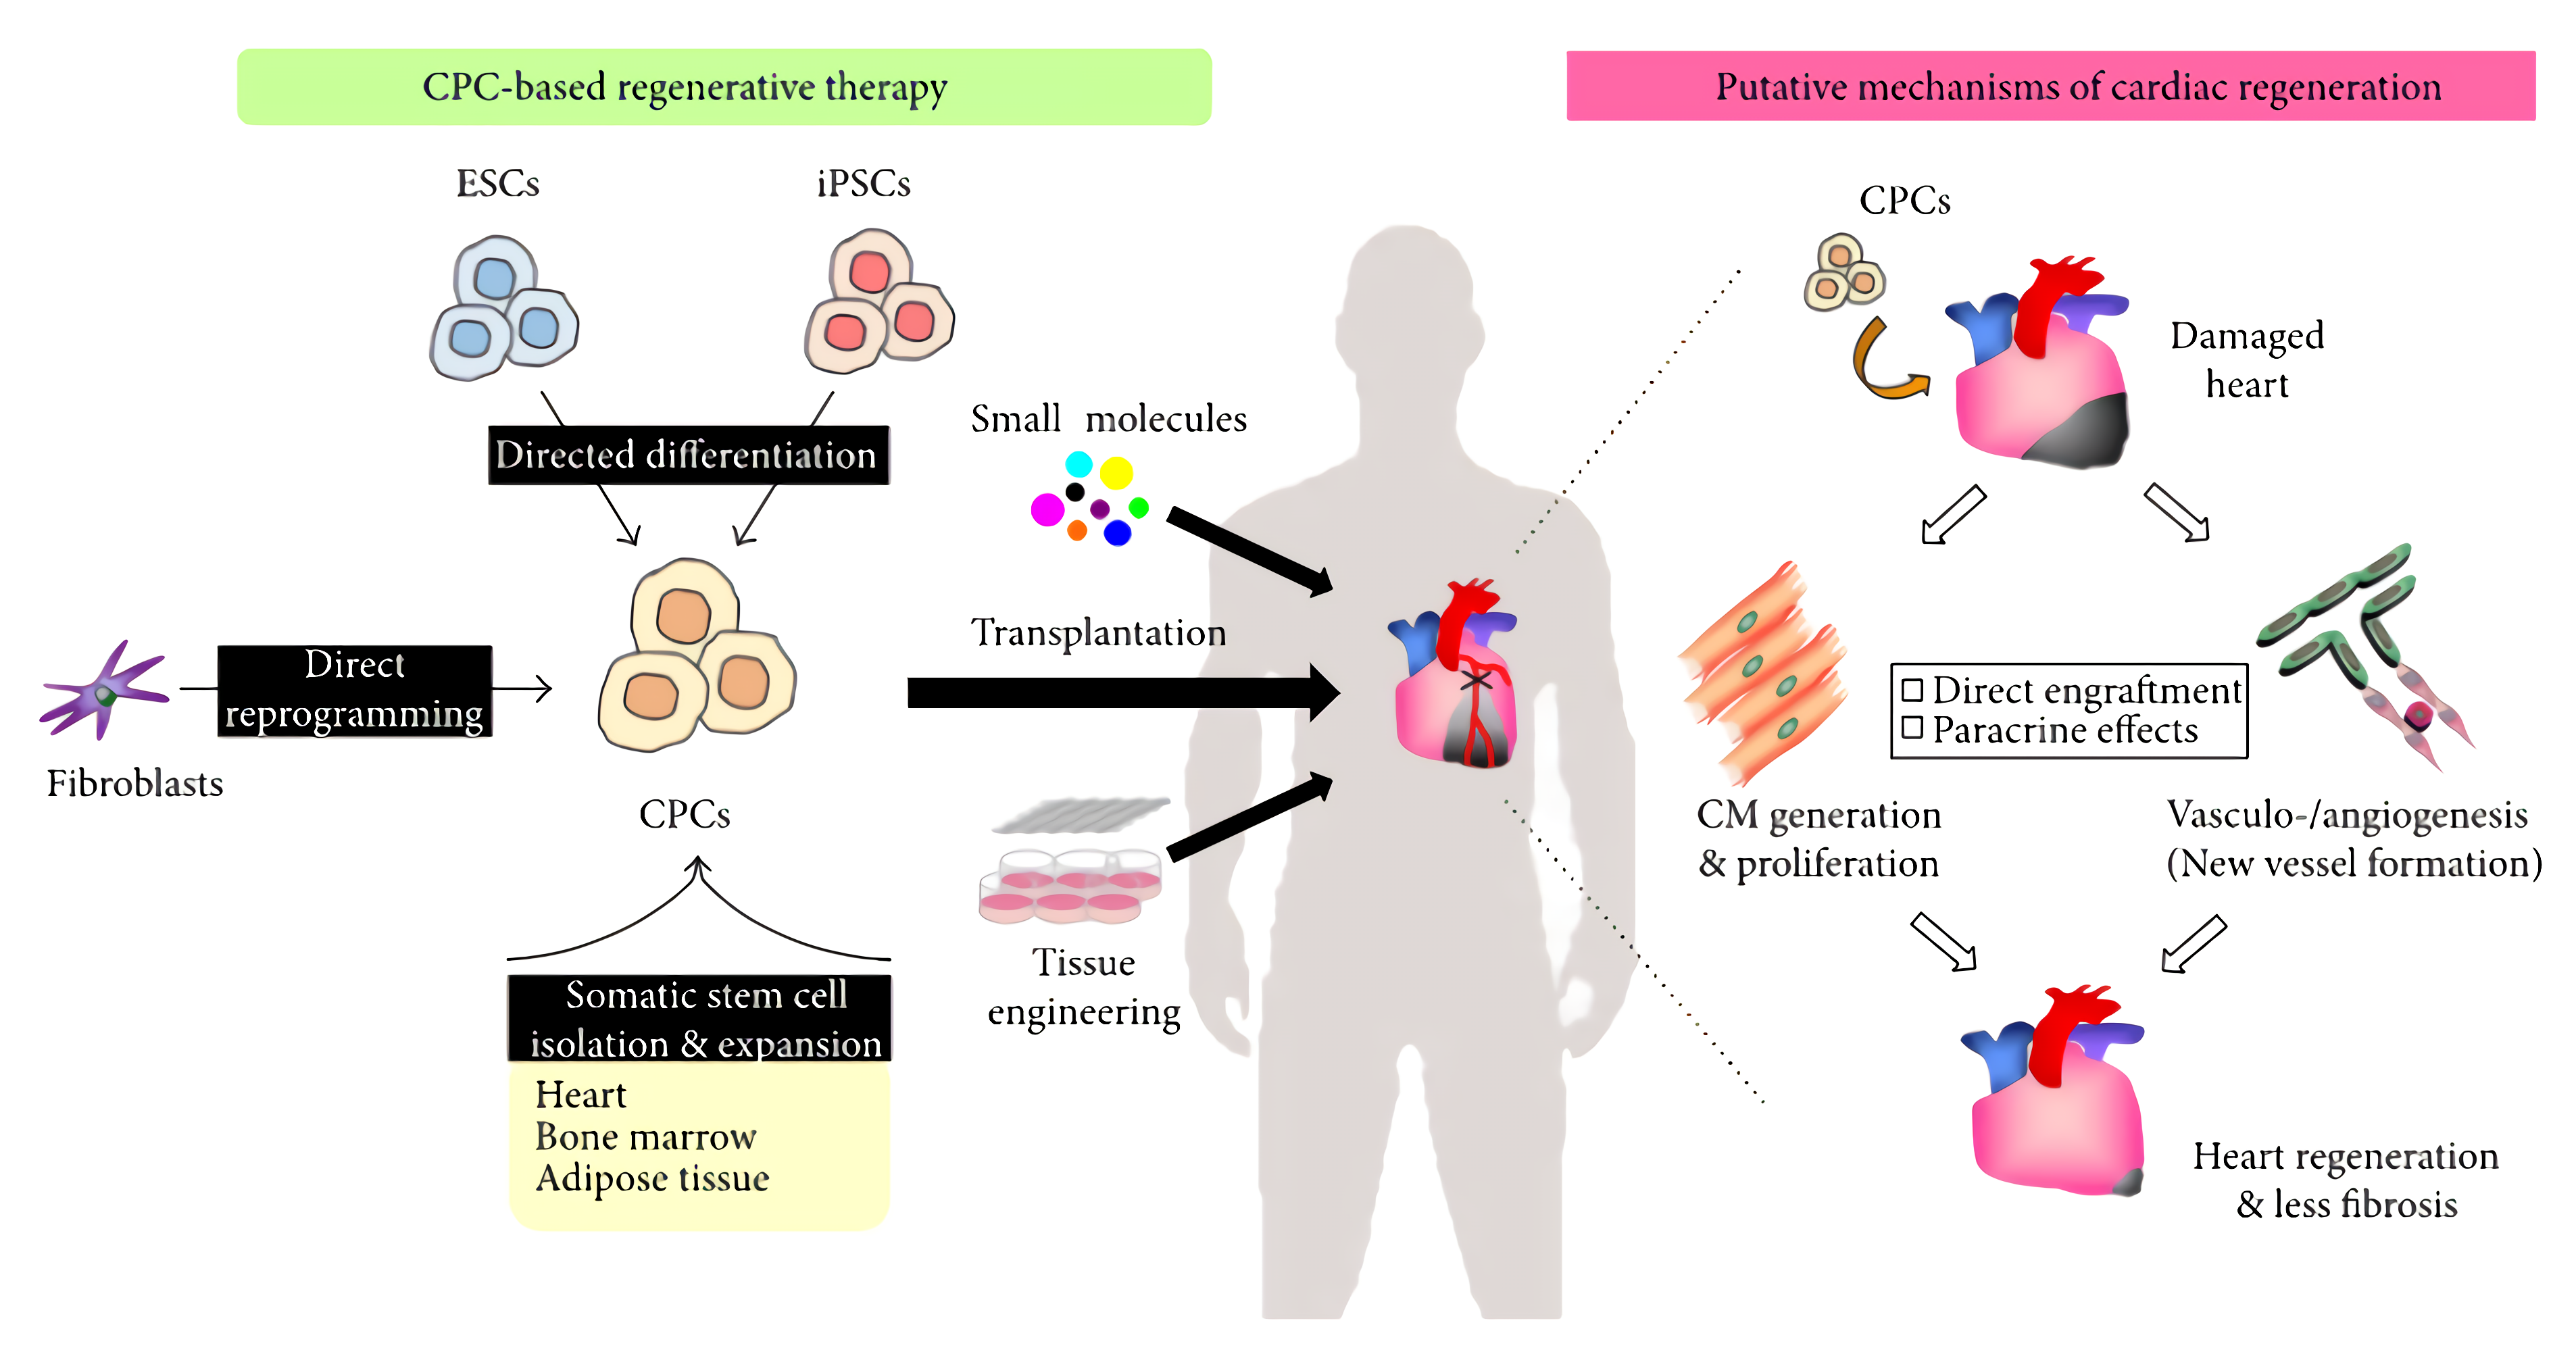 CPC-based regenerative therapy for heart disease.